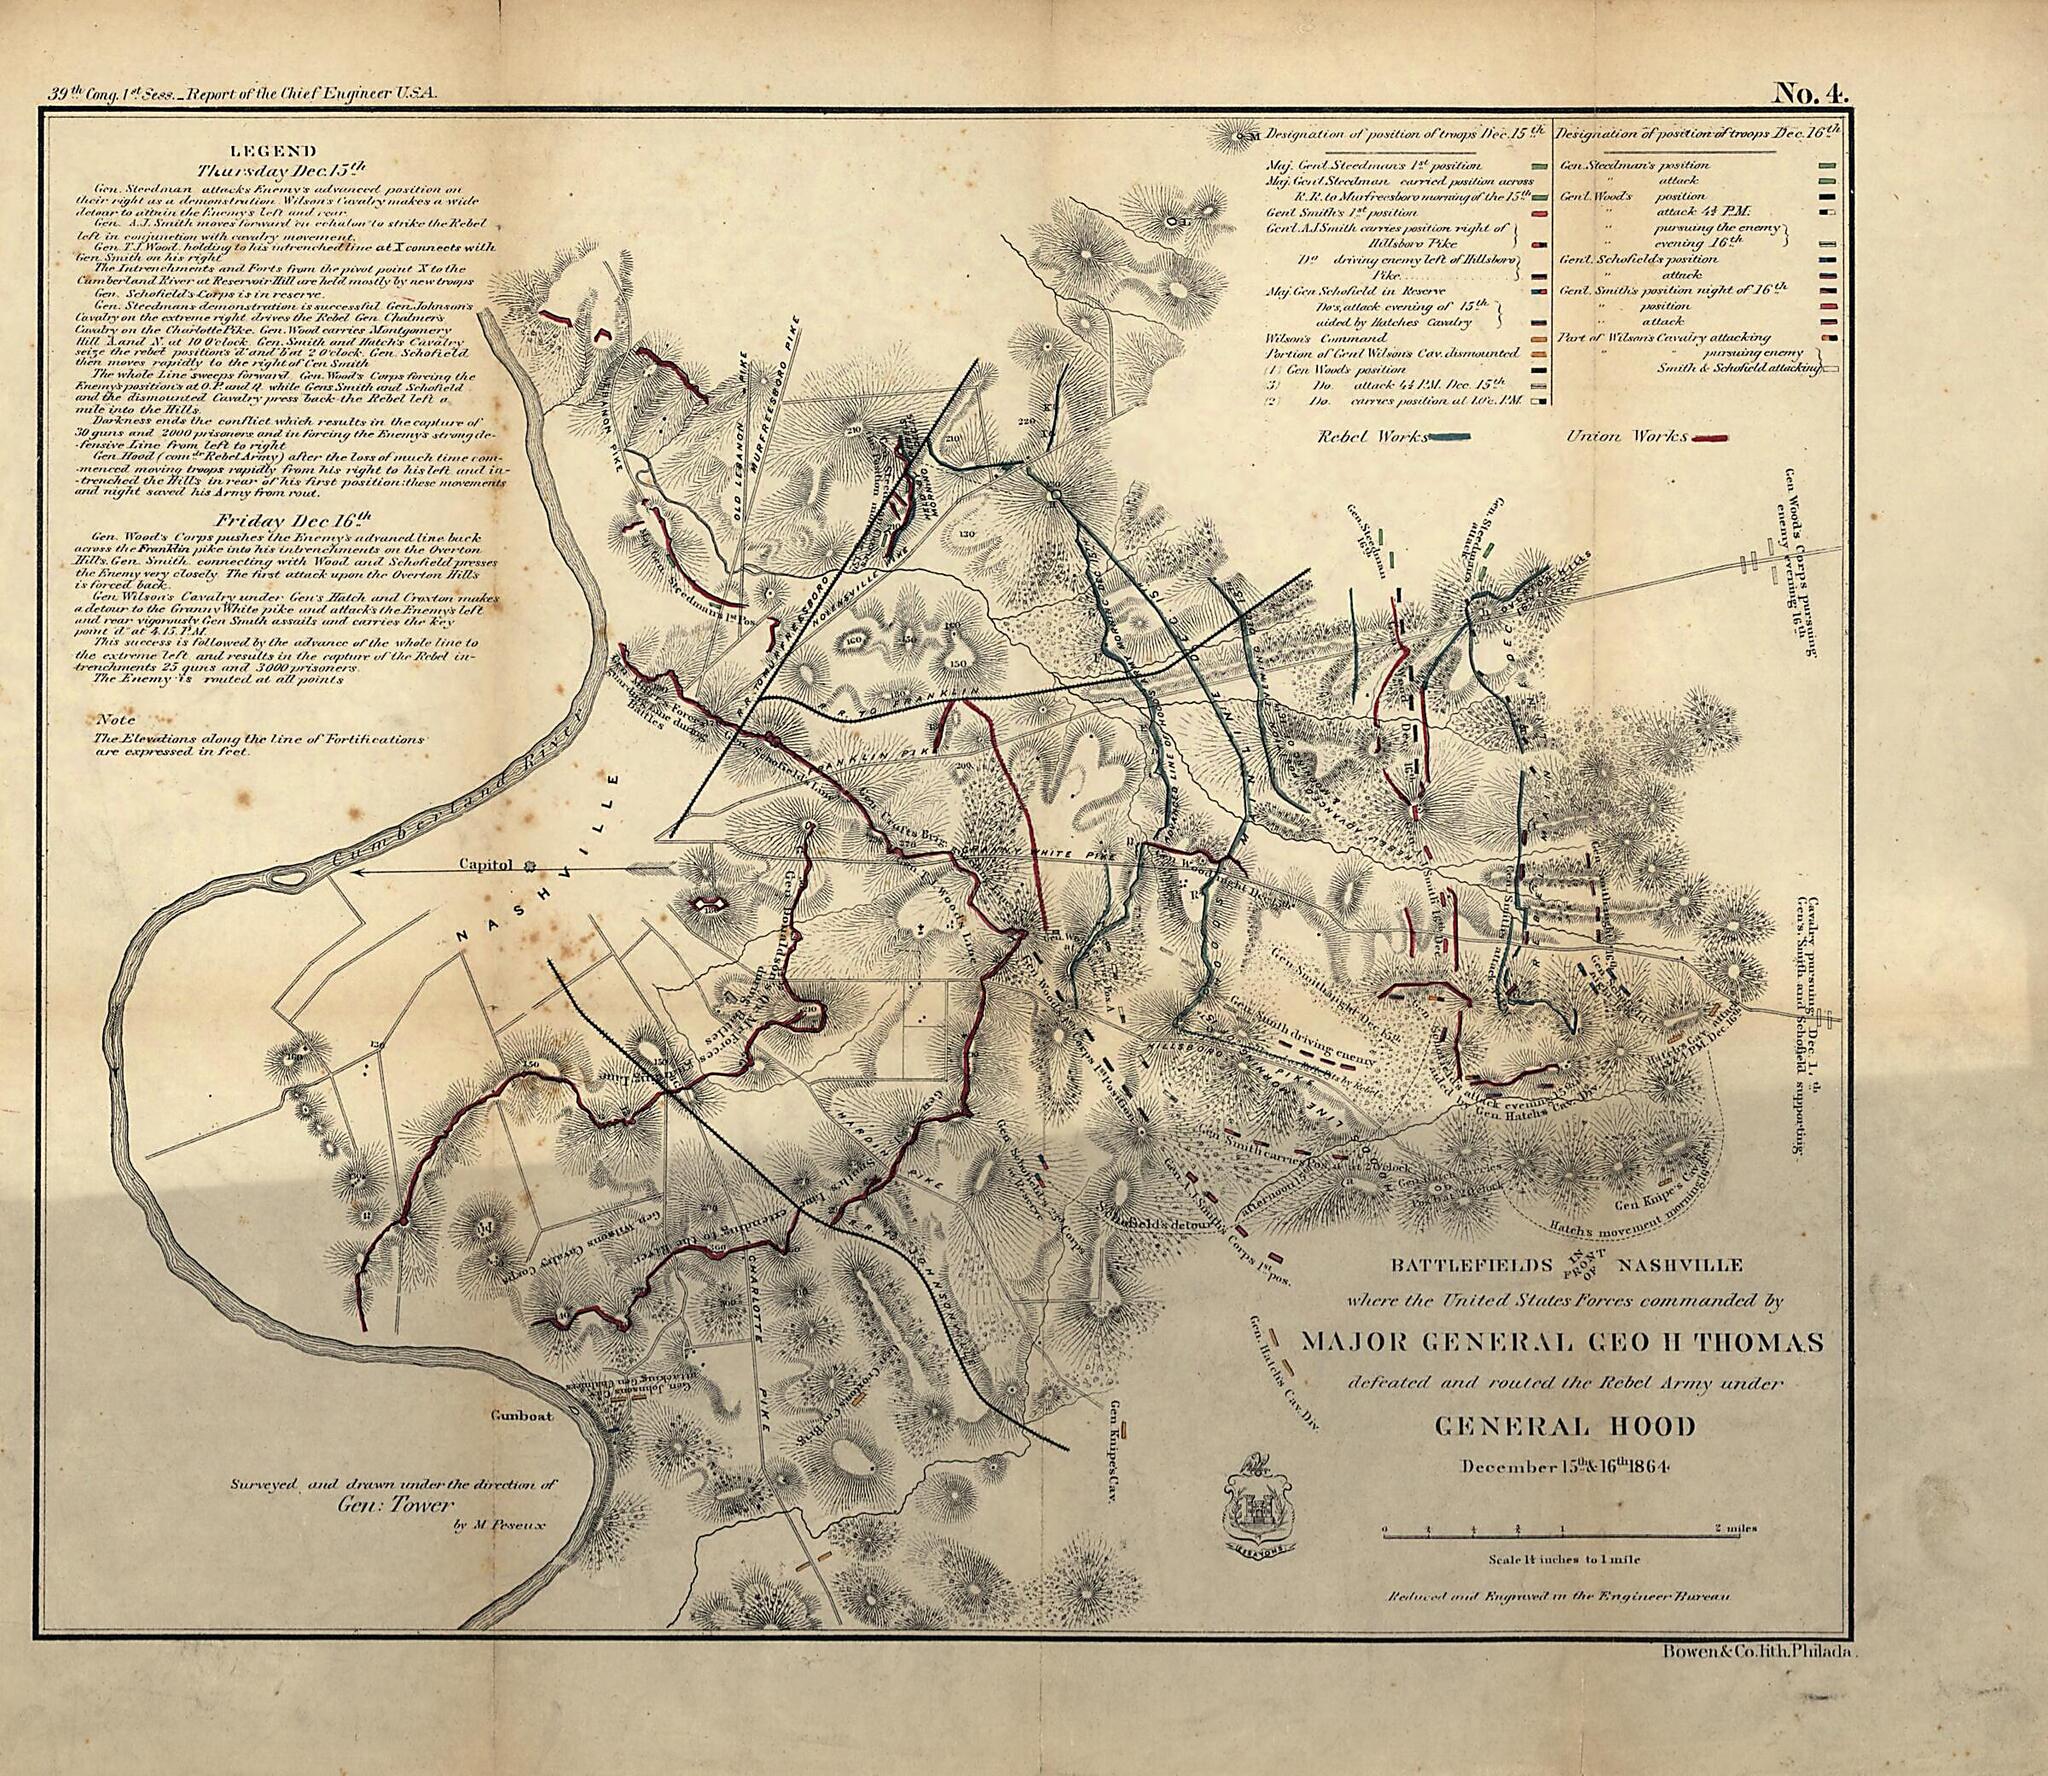 This old map of Battlefields In Front of Nashville Where the United States Forces Commanded by Major General Geo. H. Thomas Defeated and Routed the Rebel Army Under General Hood, December 15th &amp; 16th, from 1864 was created by M. Peseux in 1864